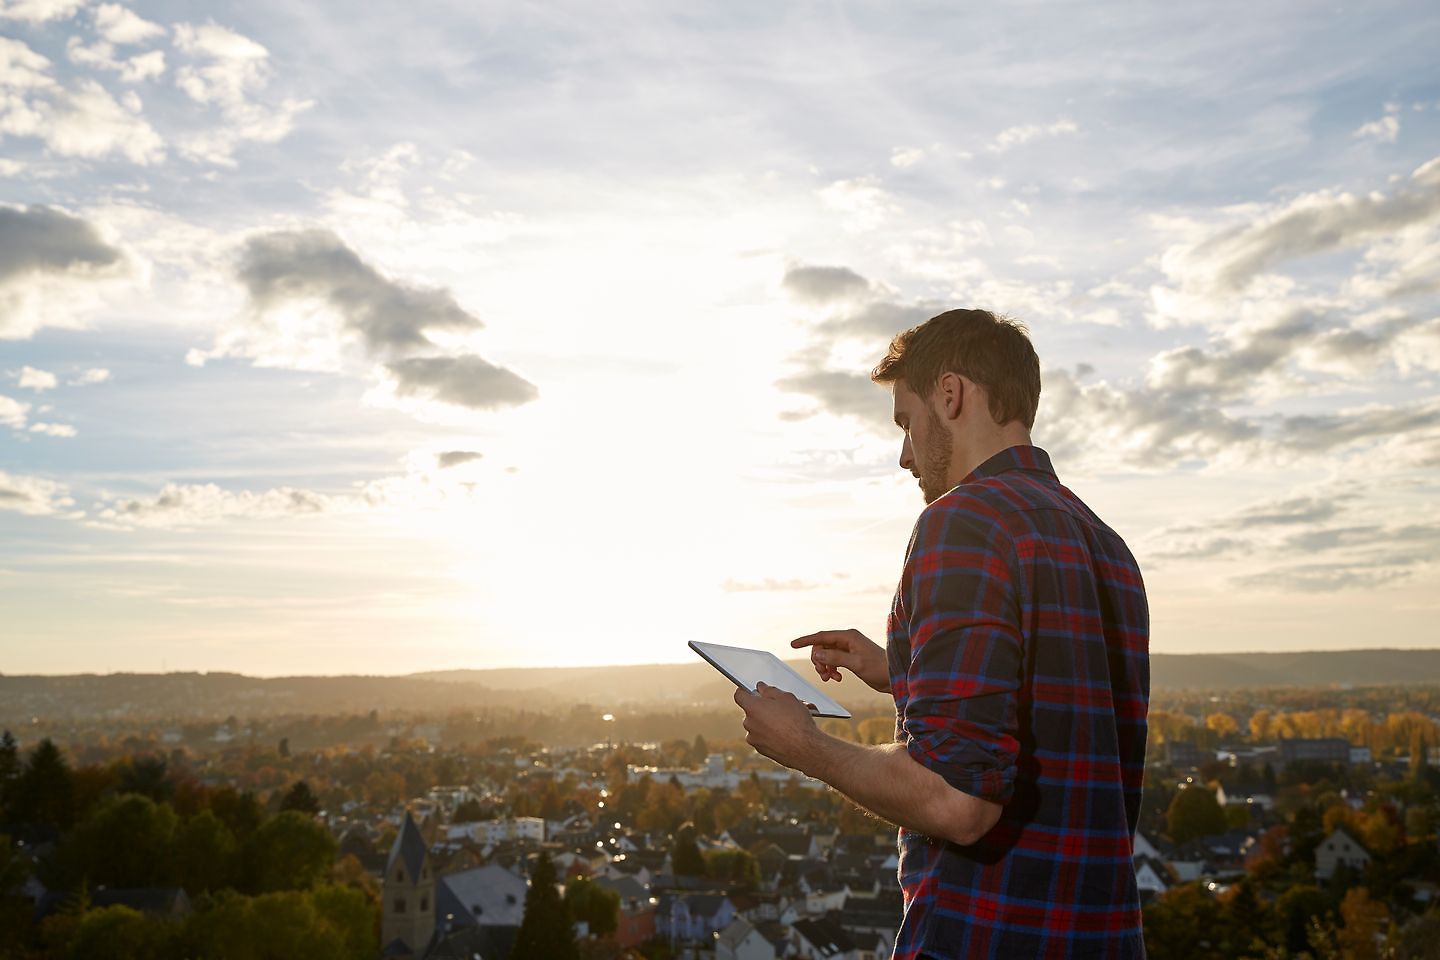 A man looks at a tablet with a view of a city in the background